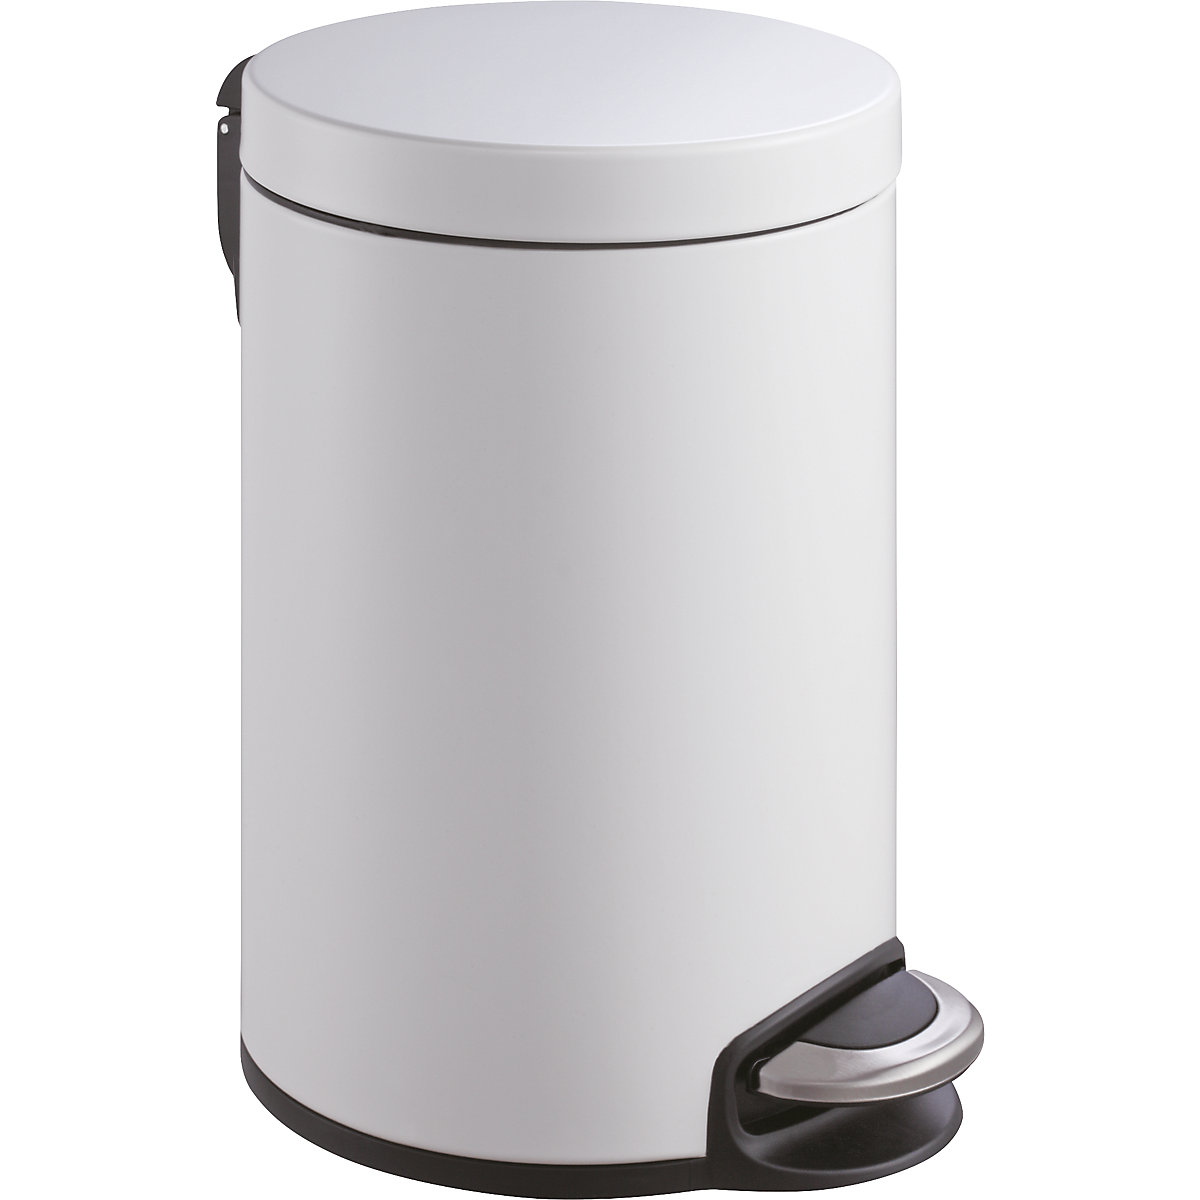 Waste collector with pedal, stainless steel